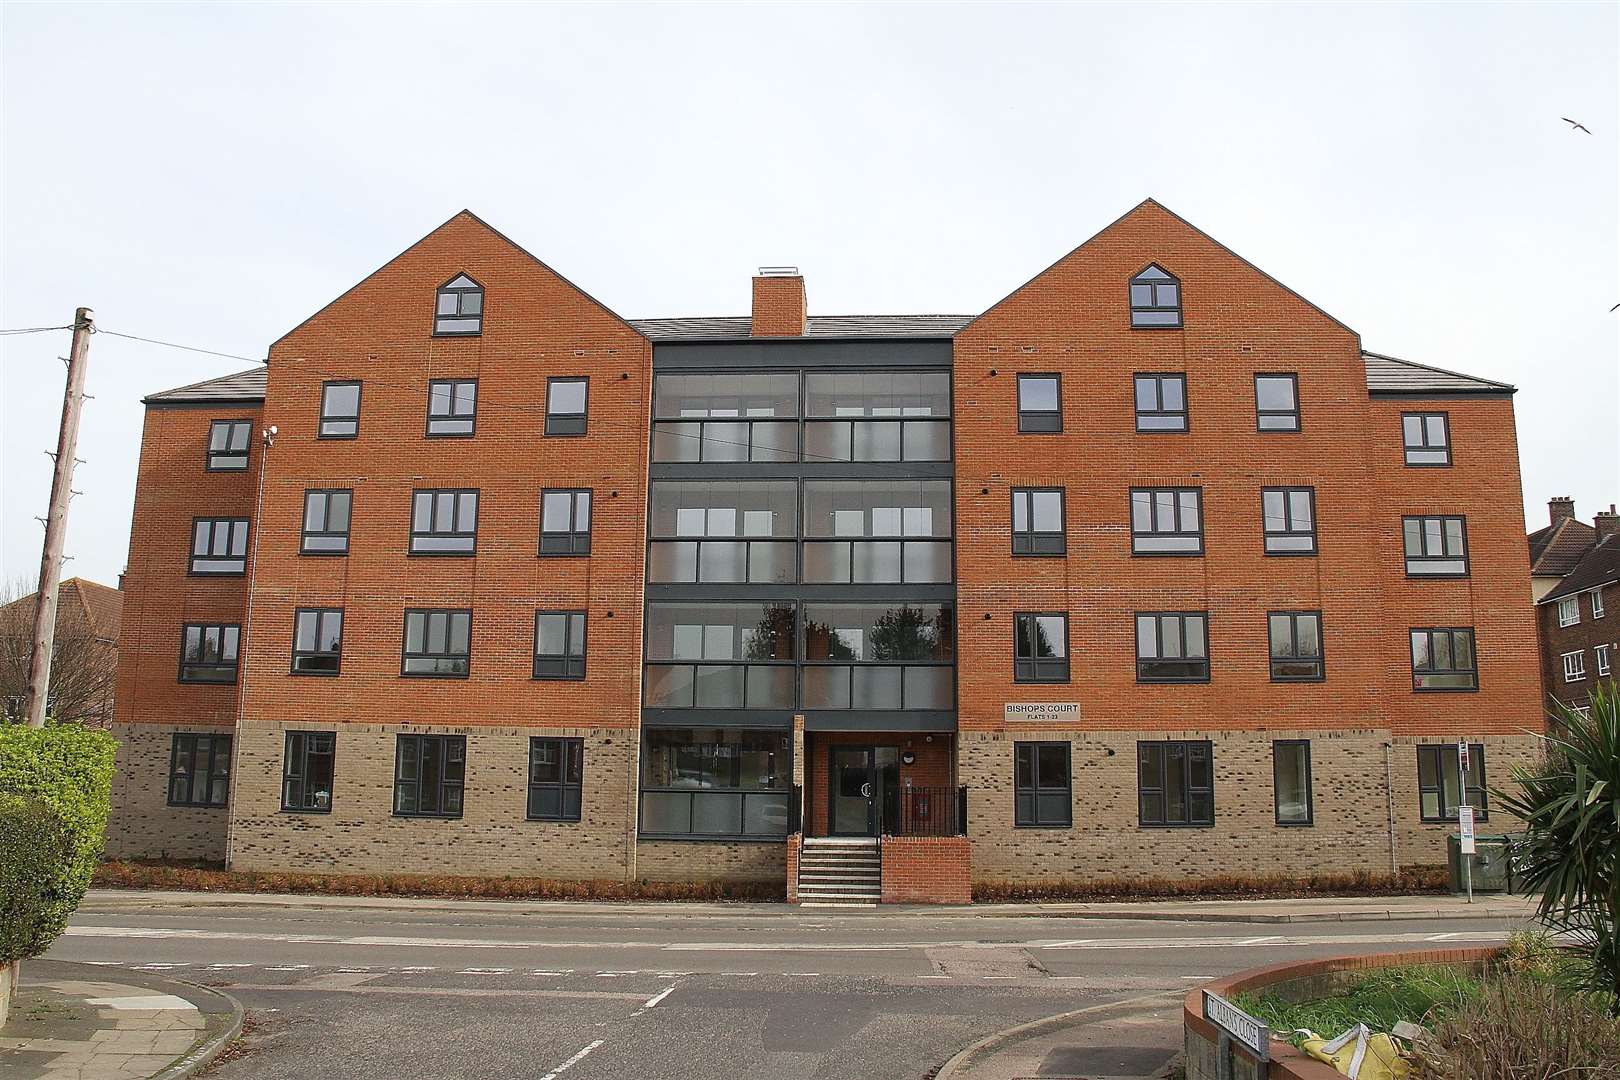 The latest development in Gravesham Borough Council’s programme of building hundreds of new council-owned homes has been opened. Picture: Gravesham Borough Council